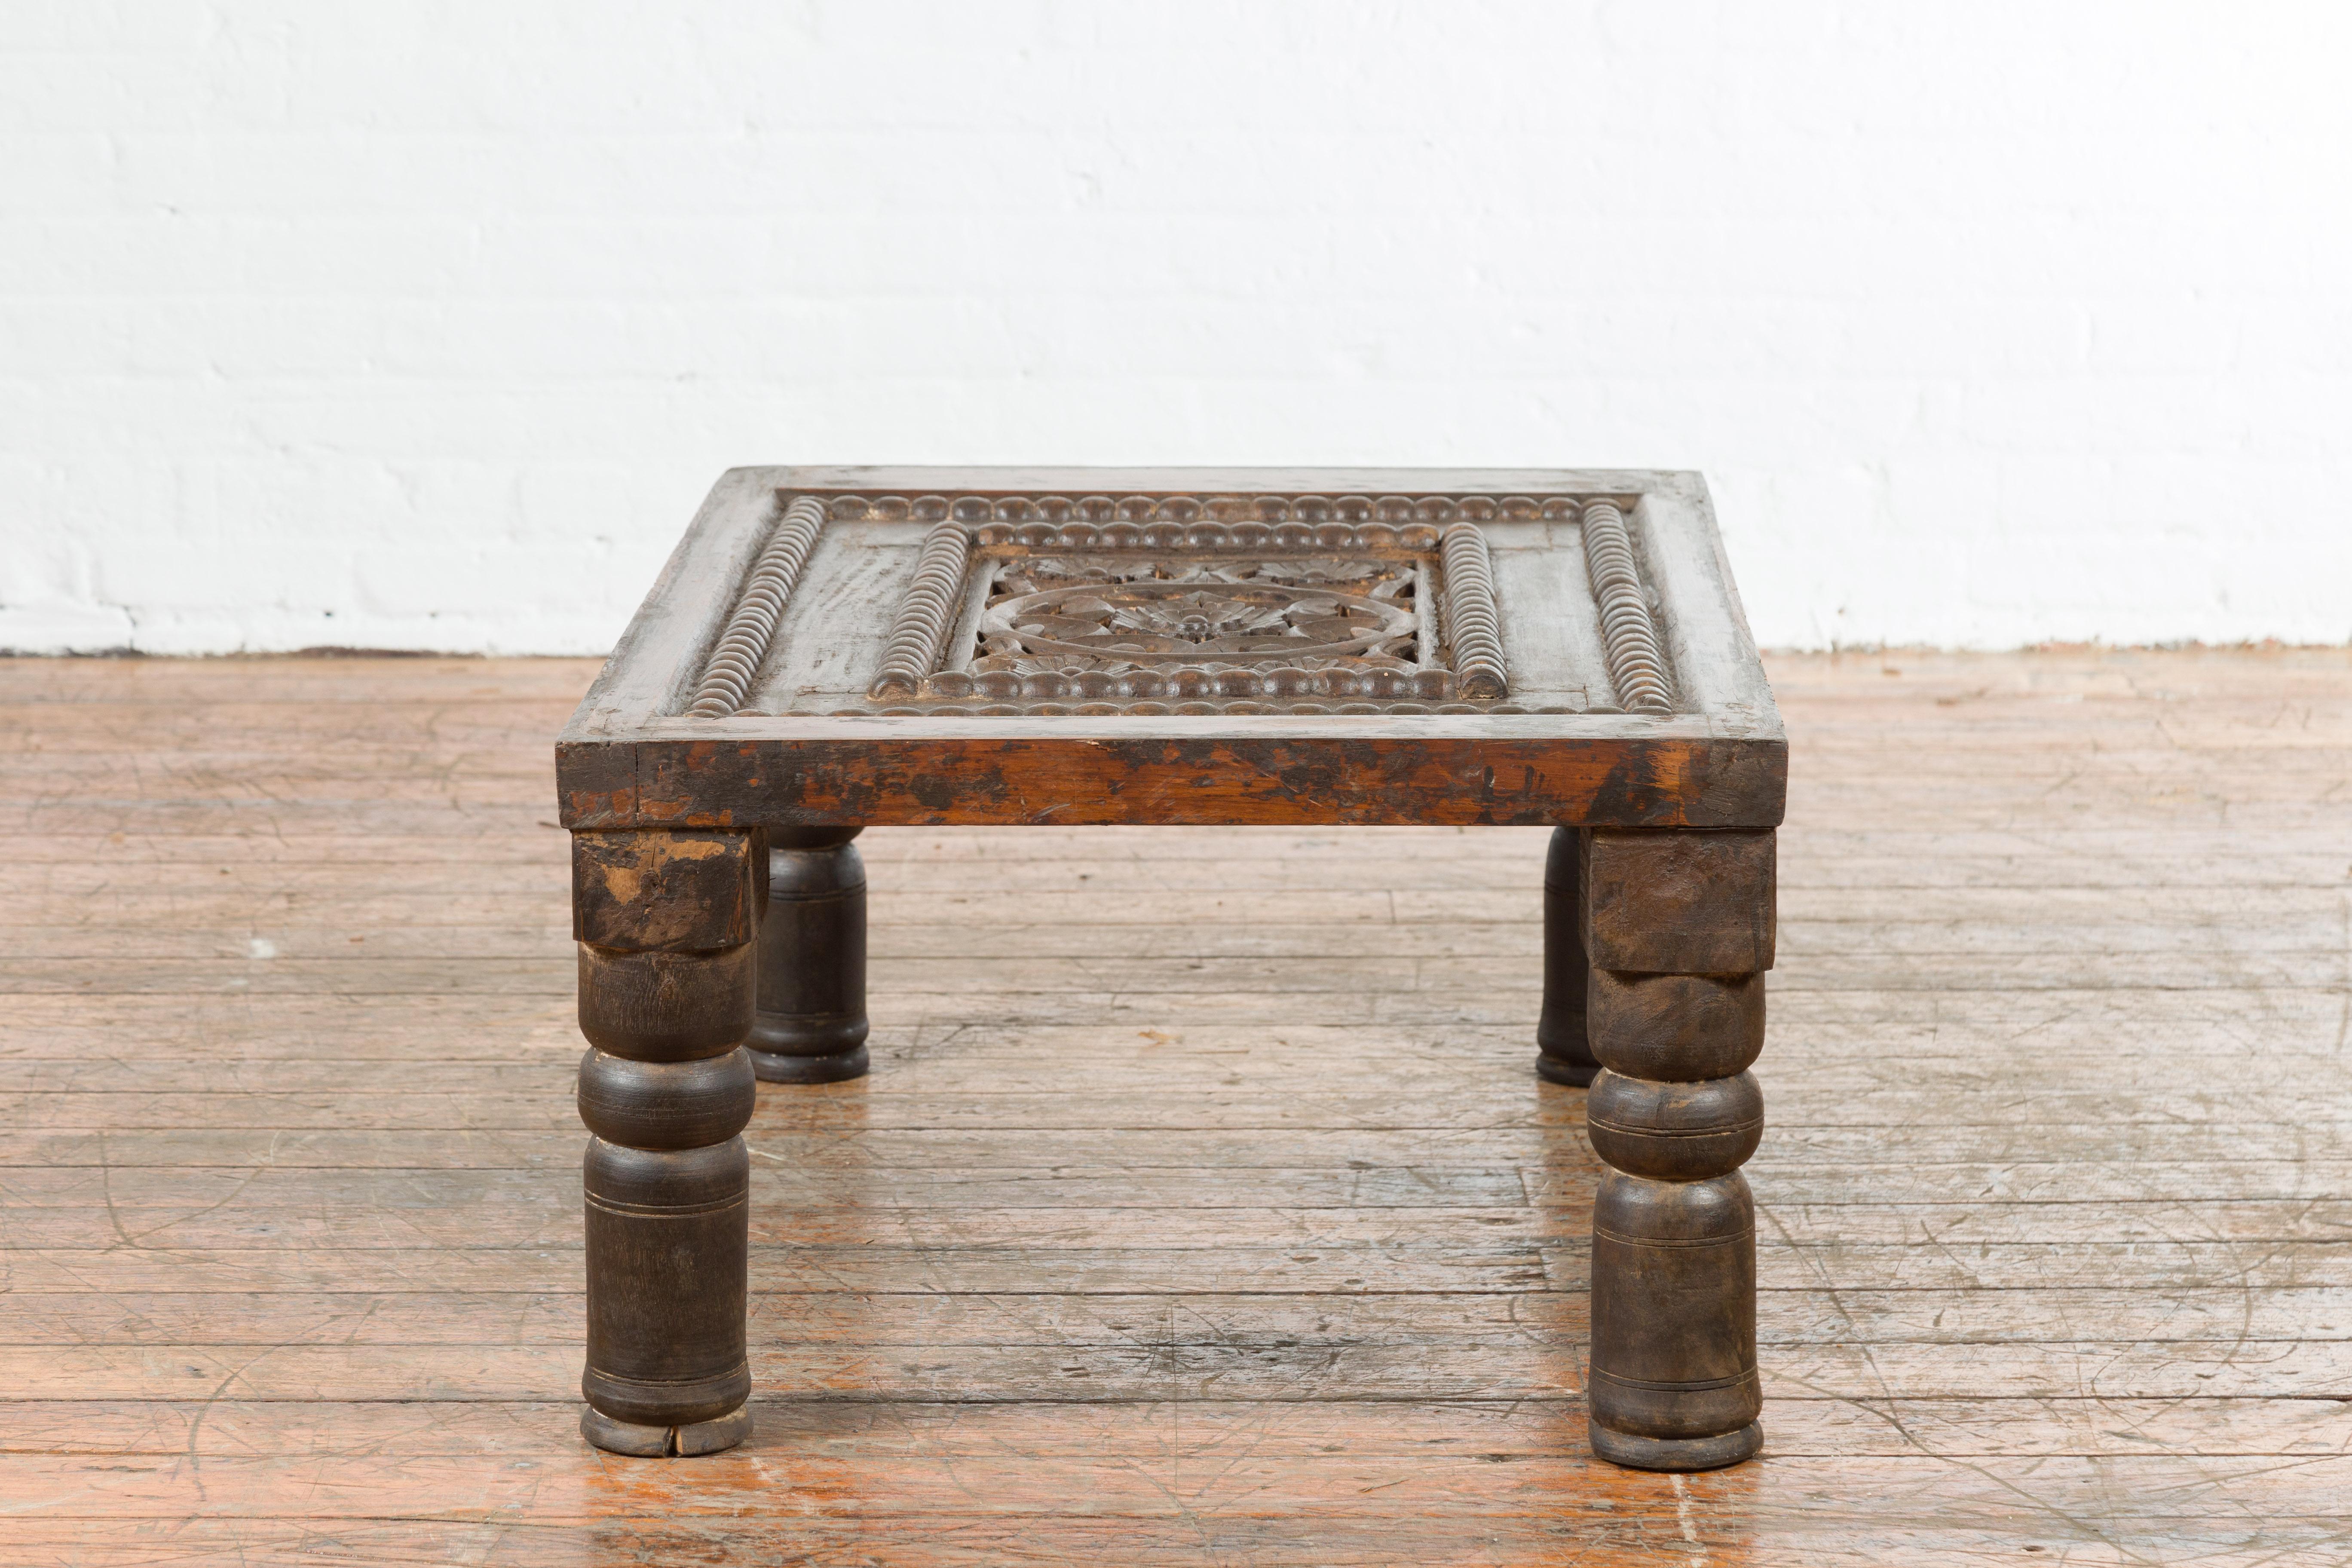 Indian 19th Century Small Wooden Coffee Table with Carved Floral Motifs For Sale 8